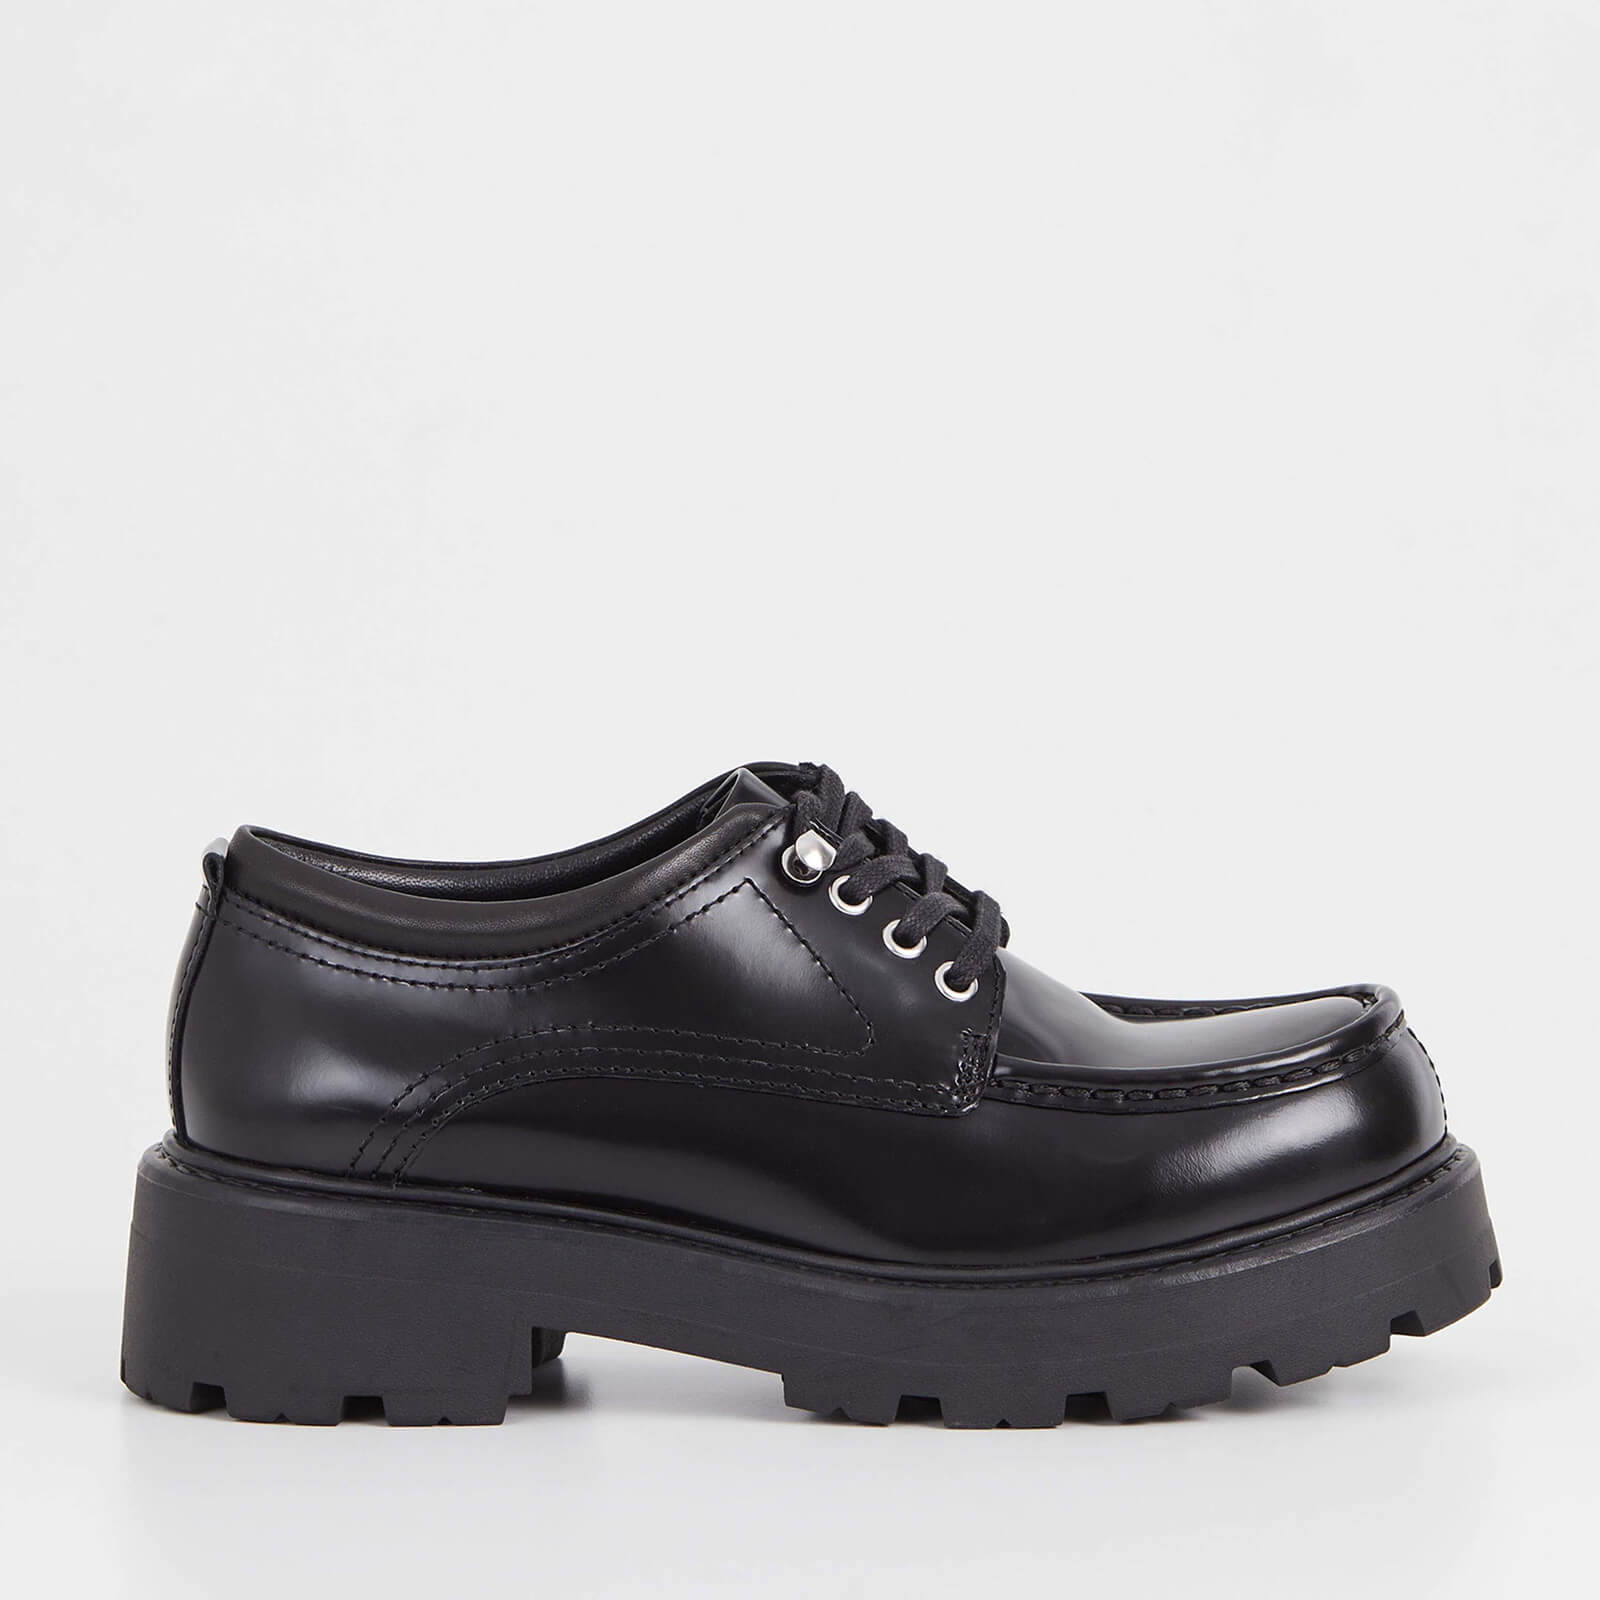 Vagabond Cosmo 2.0 Leather Lace Up Shoes product